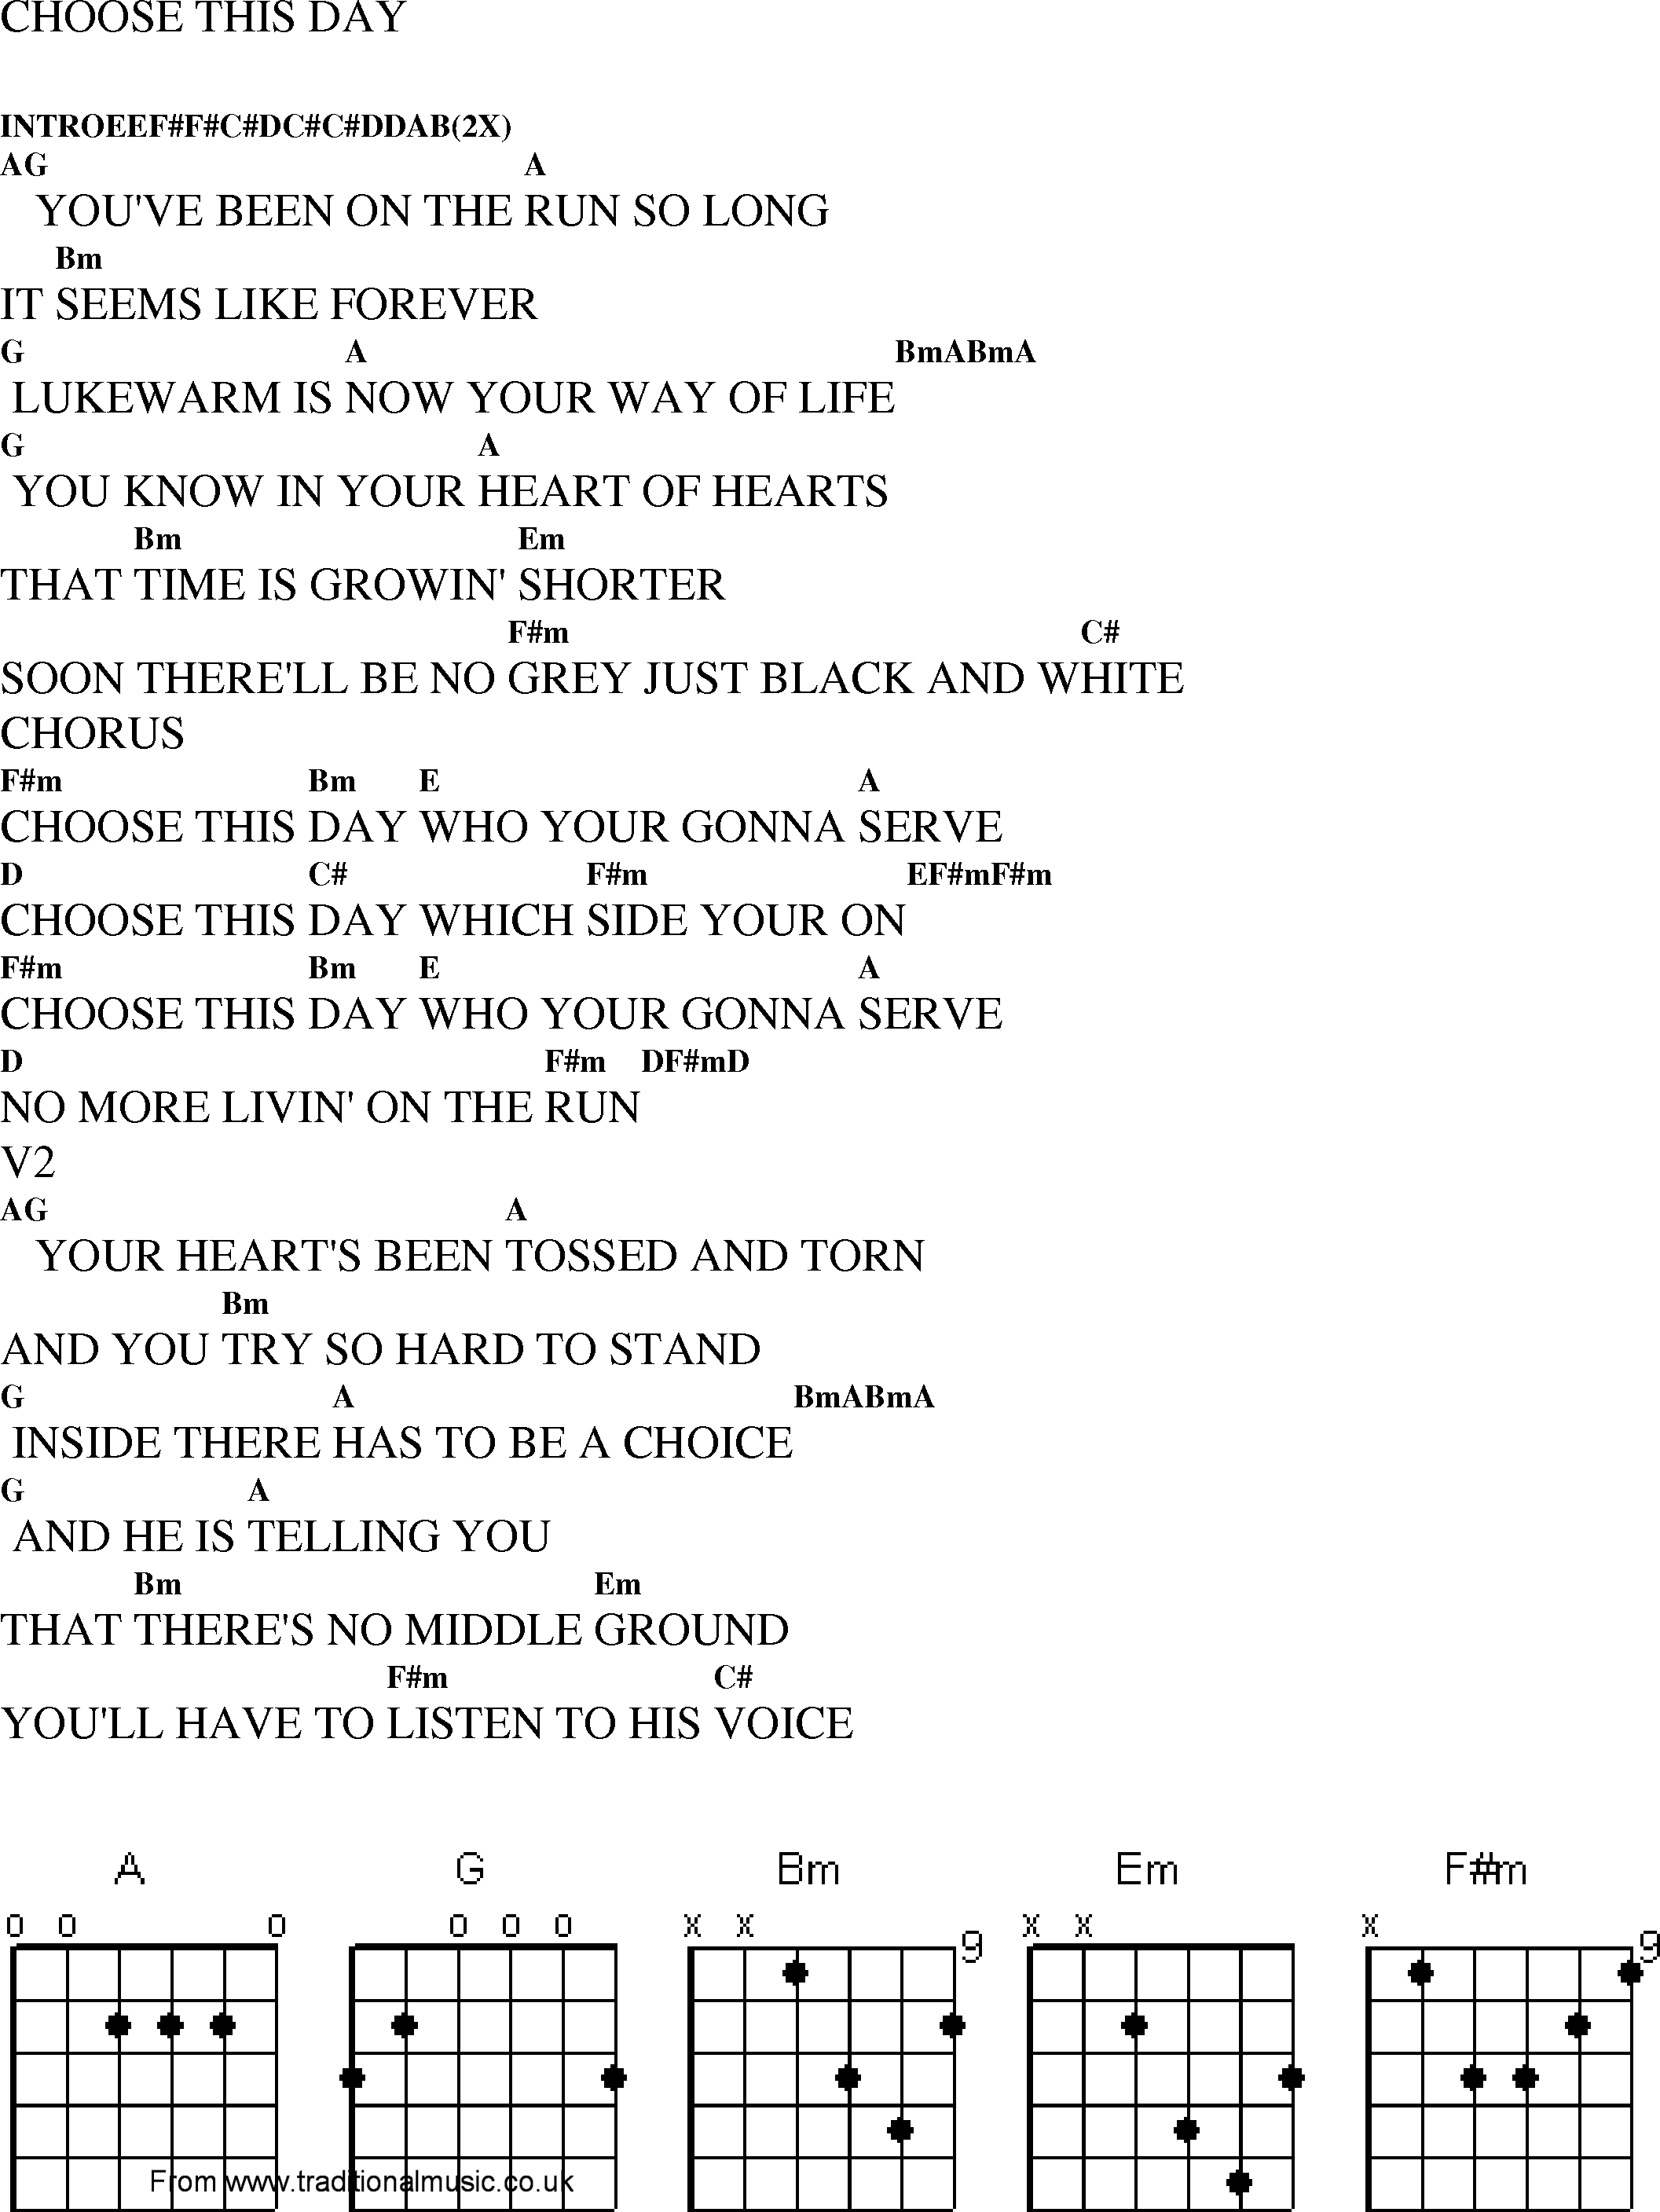 Gospel Song: choose_this_day, lyrics and chords.